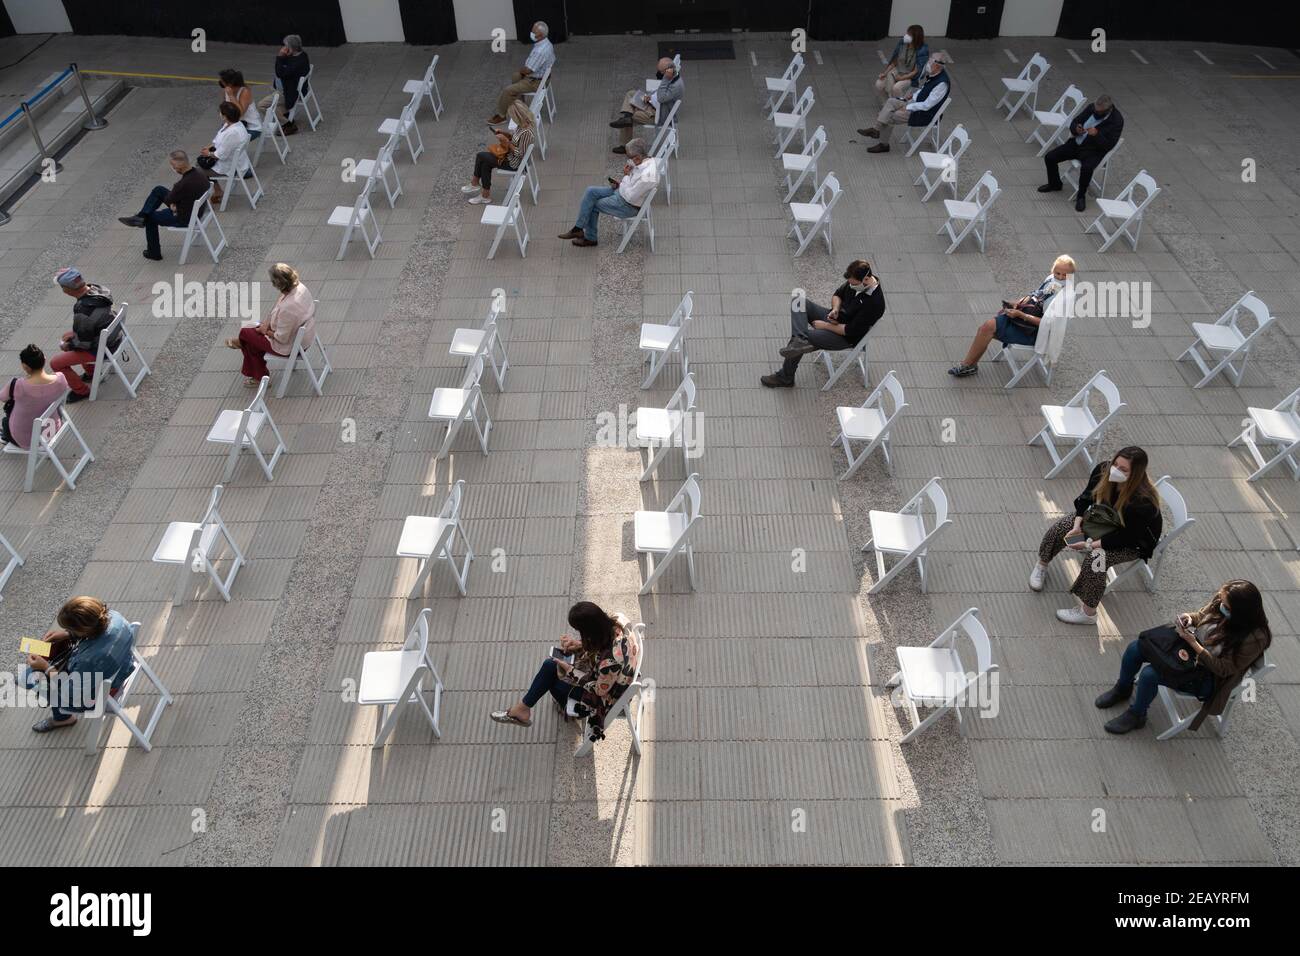 Santiago, Metropolitana, Chile. 11th Feb, 2021. People between 73 and 74 years old wait to be vaccinated with the Sinovac vaccine, in the second week of mass vaccination against Covid in Chile. Credit: Matias Basualdo/ZUMA Wire/Alamy Live News Stock Photo